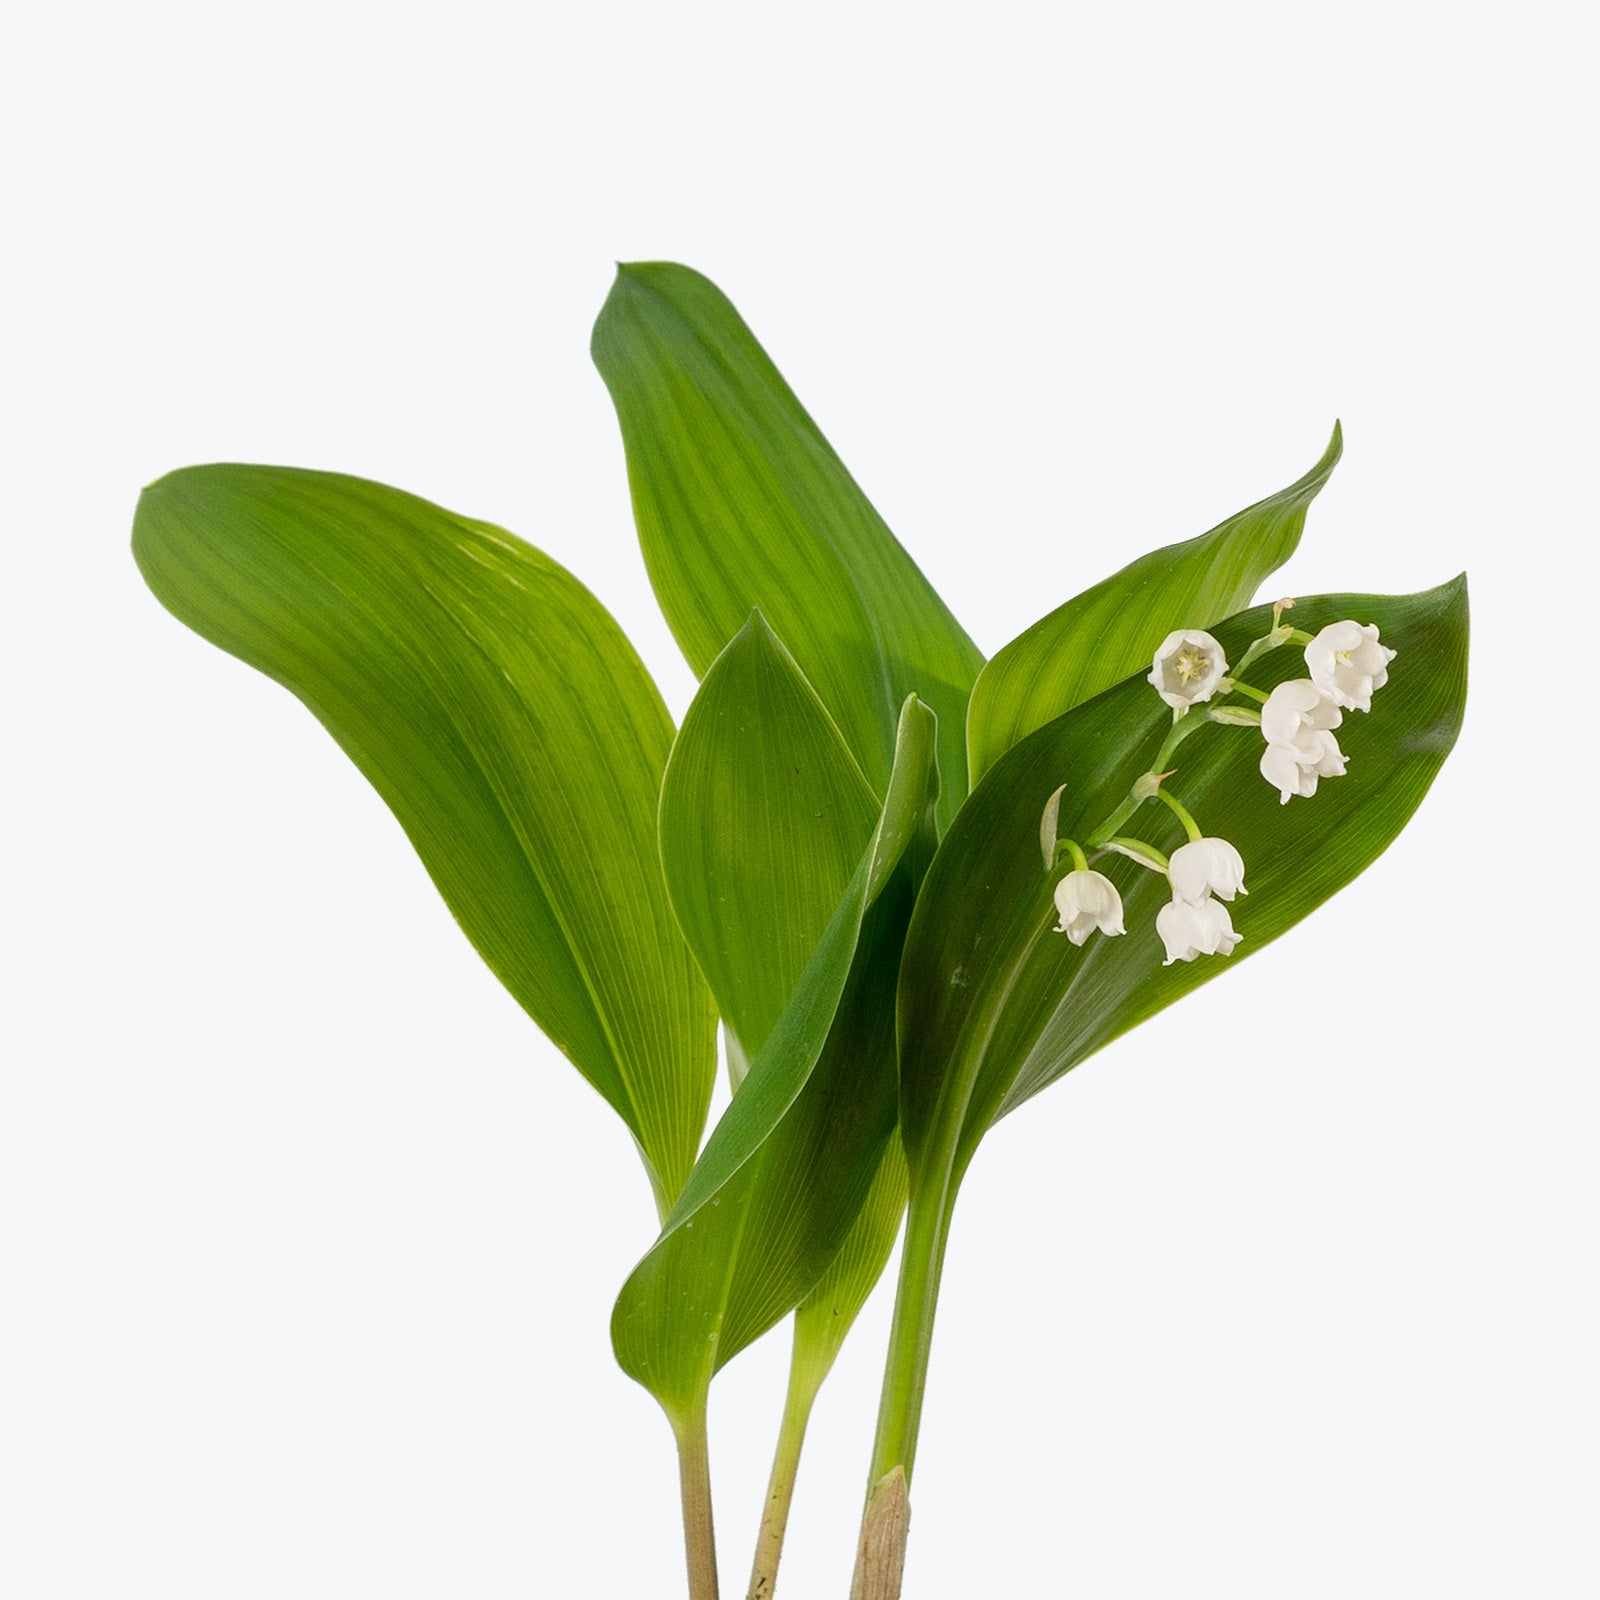 Lily of the Valley - Convallaria majalis - House Plants Delivery